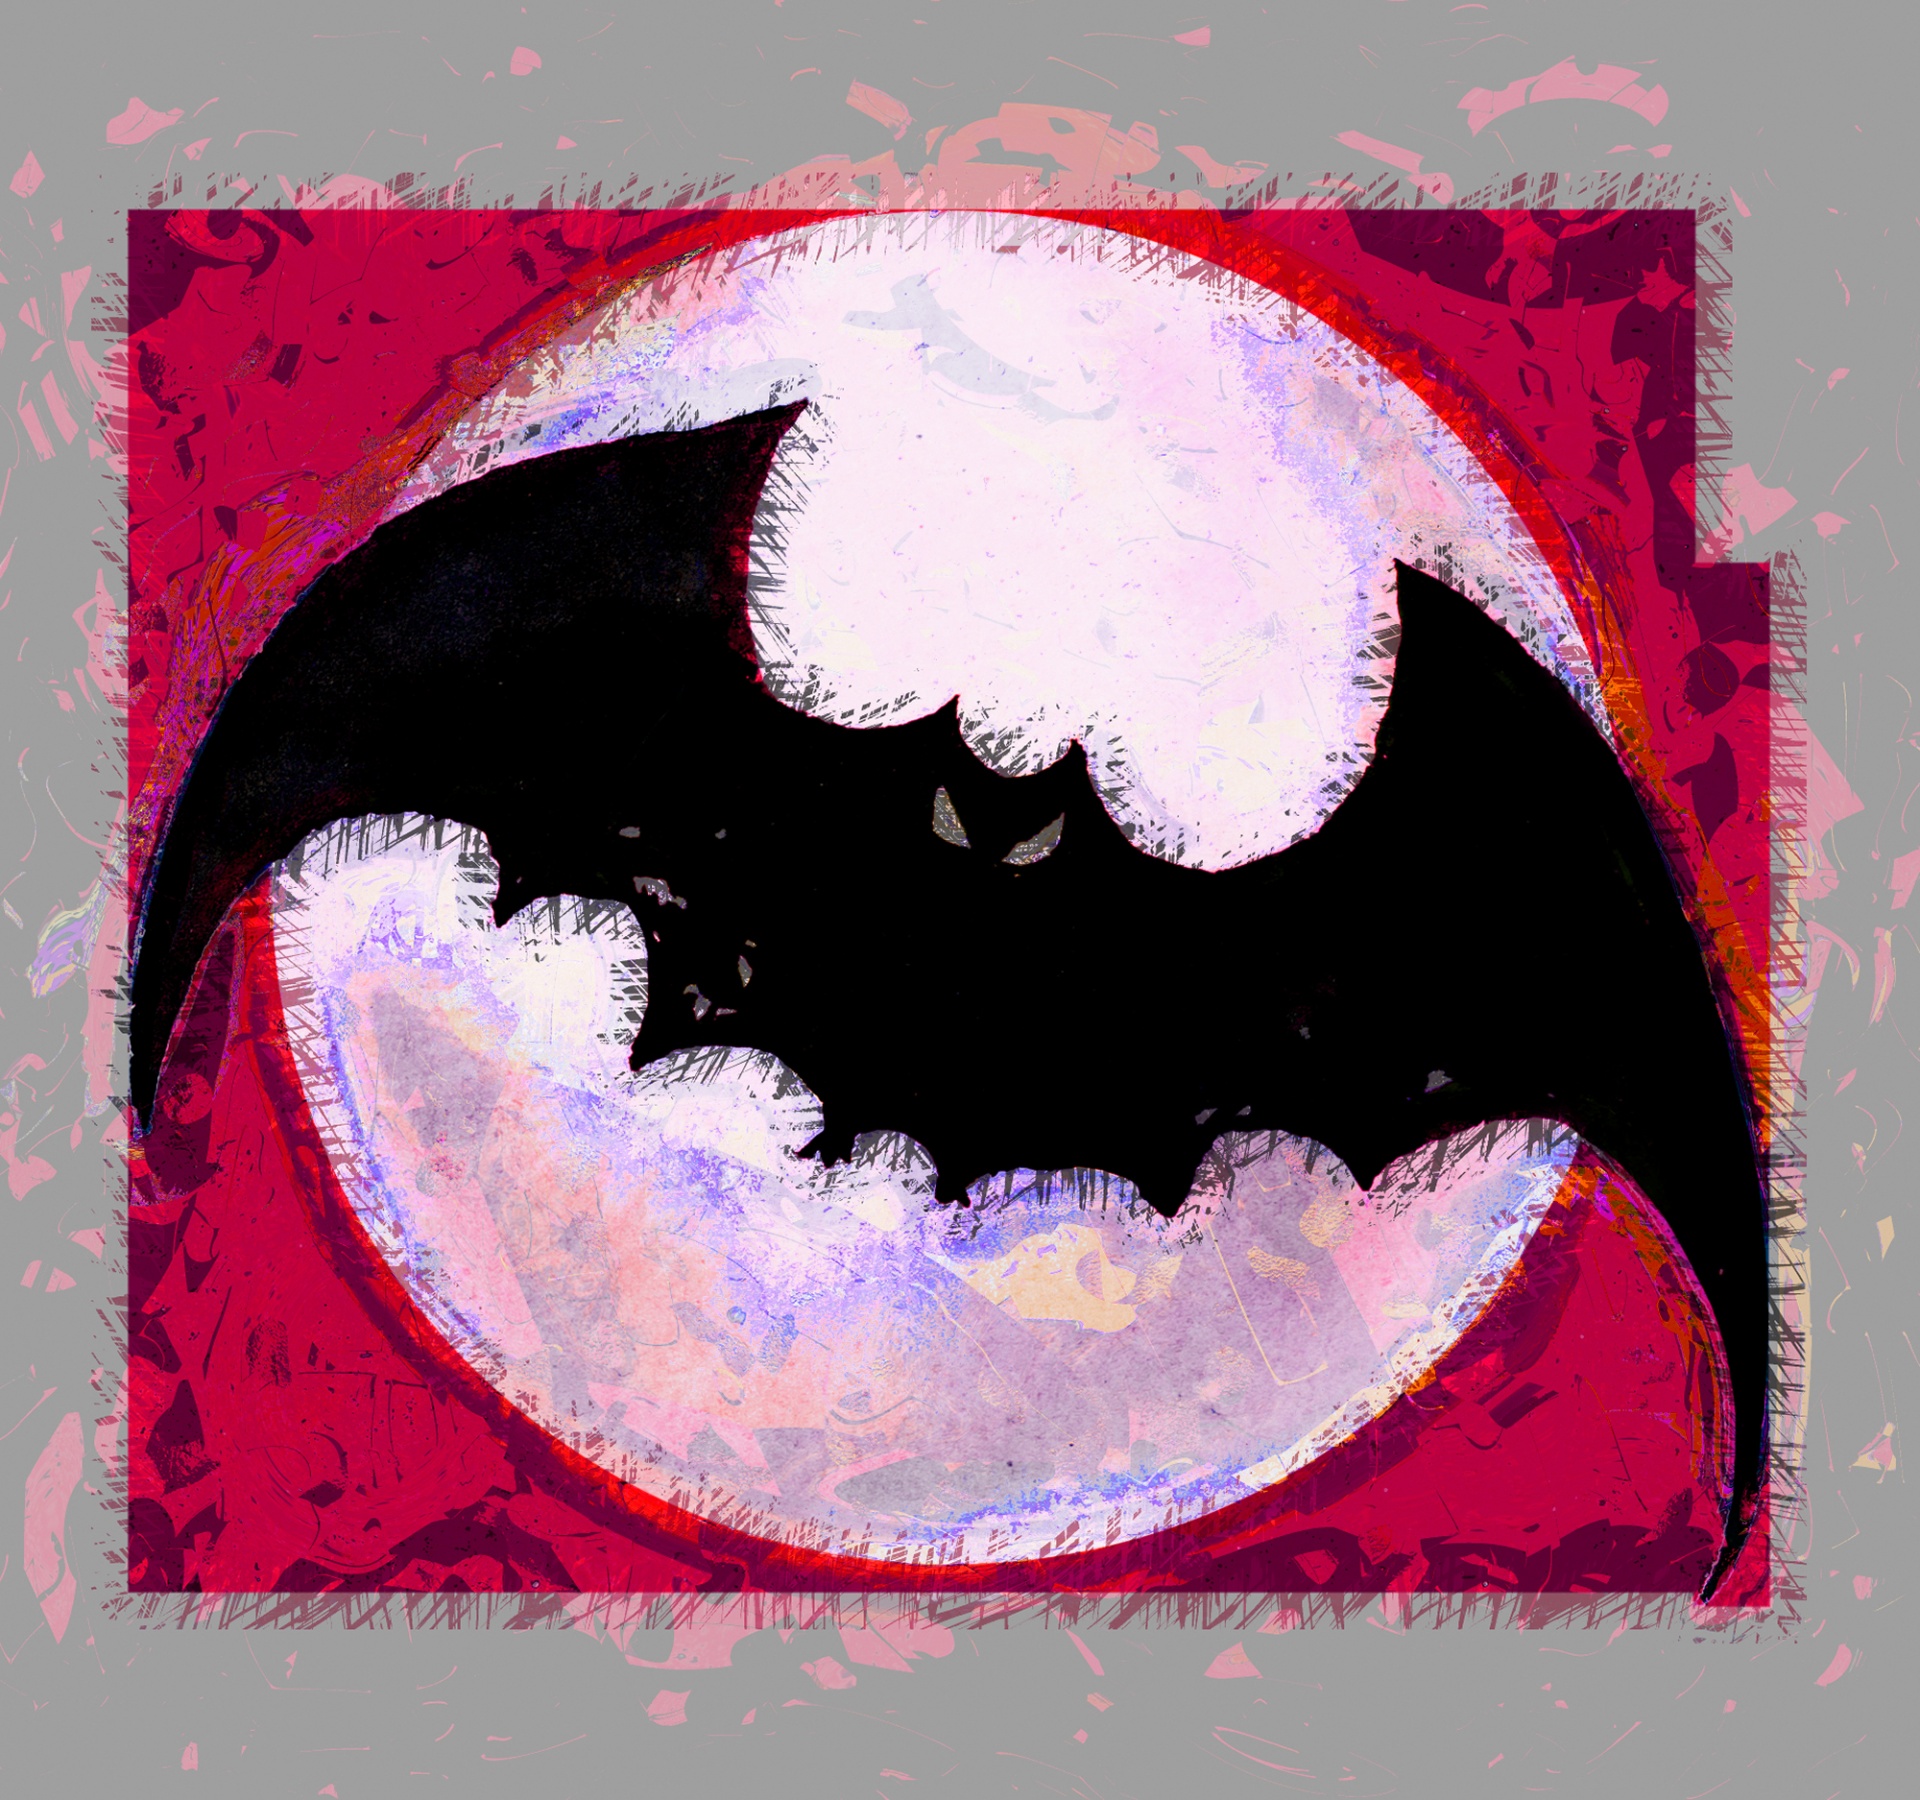 grunge illustration of a full moon with a bat in the center